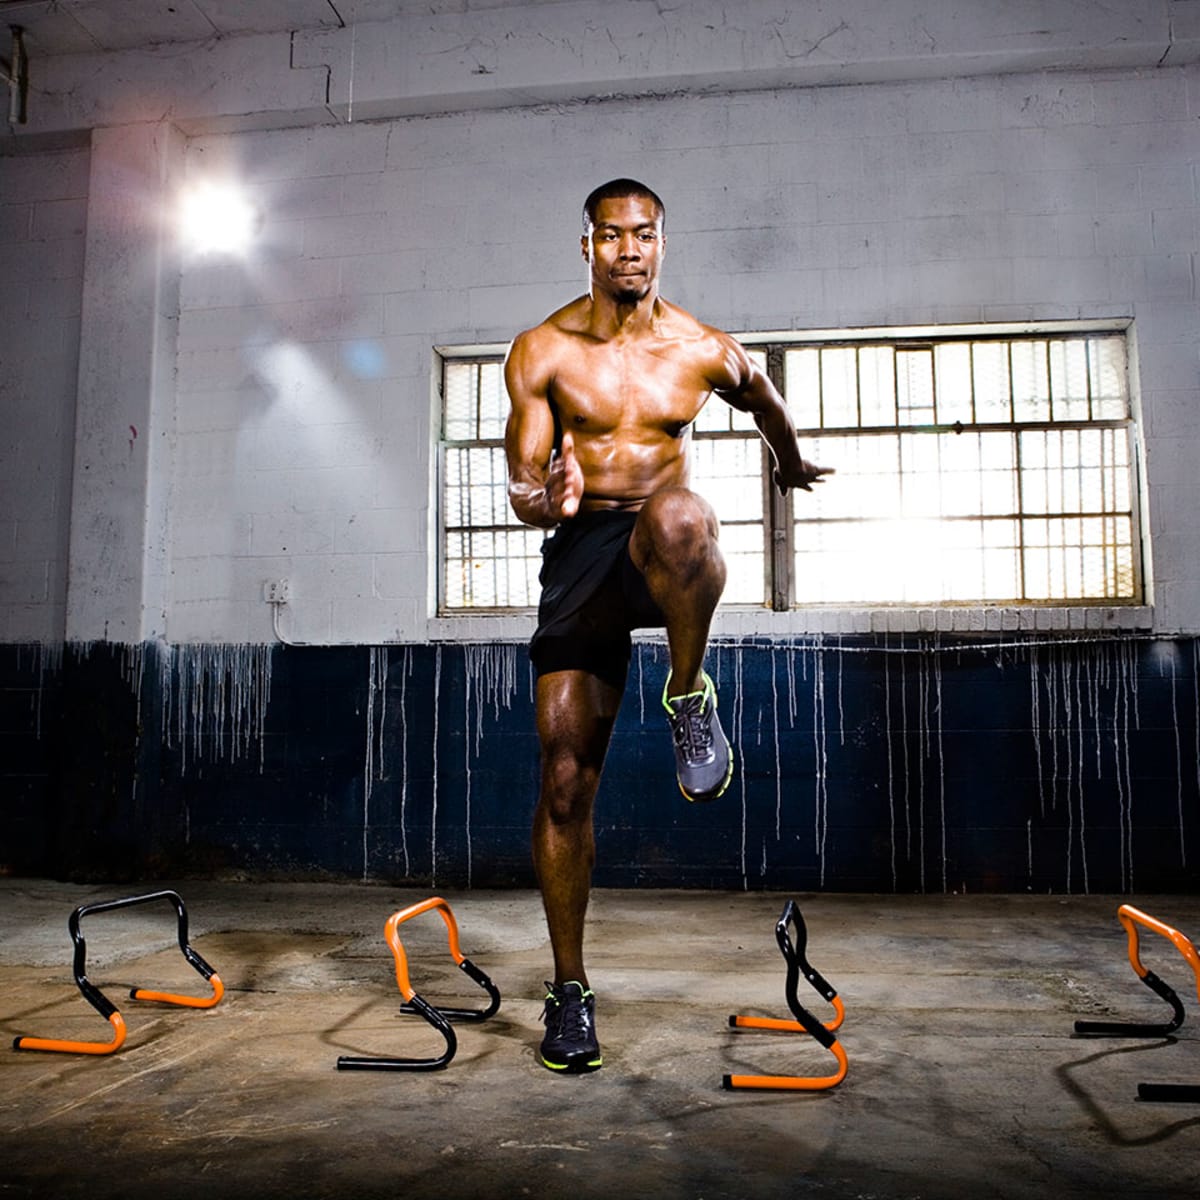 Agility-training Exercises That Will Make You Better at Any Sport - Men's  Journal